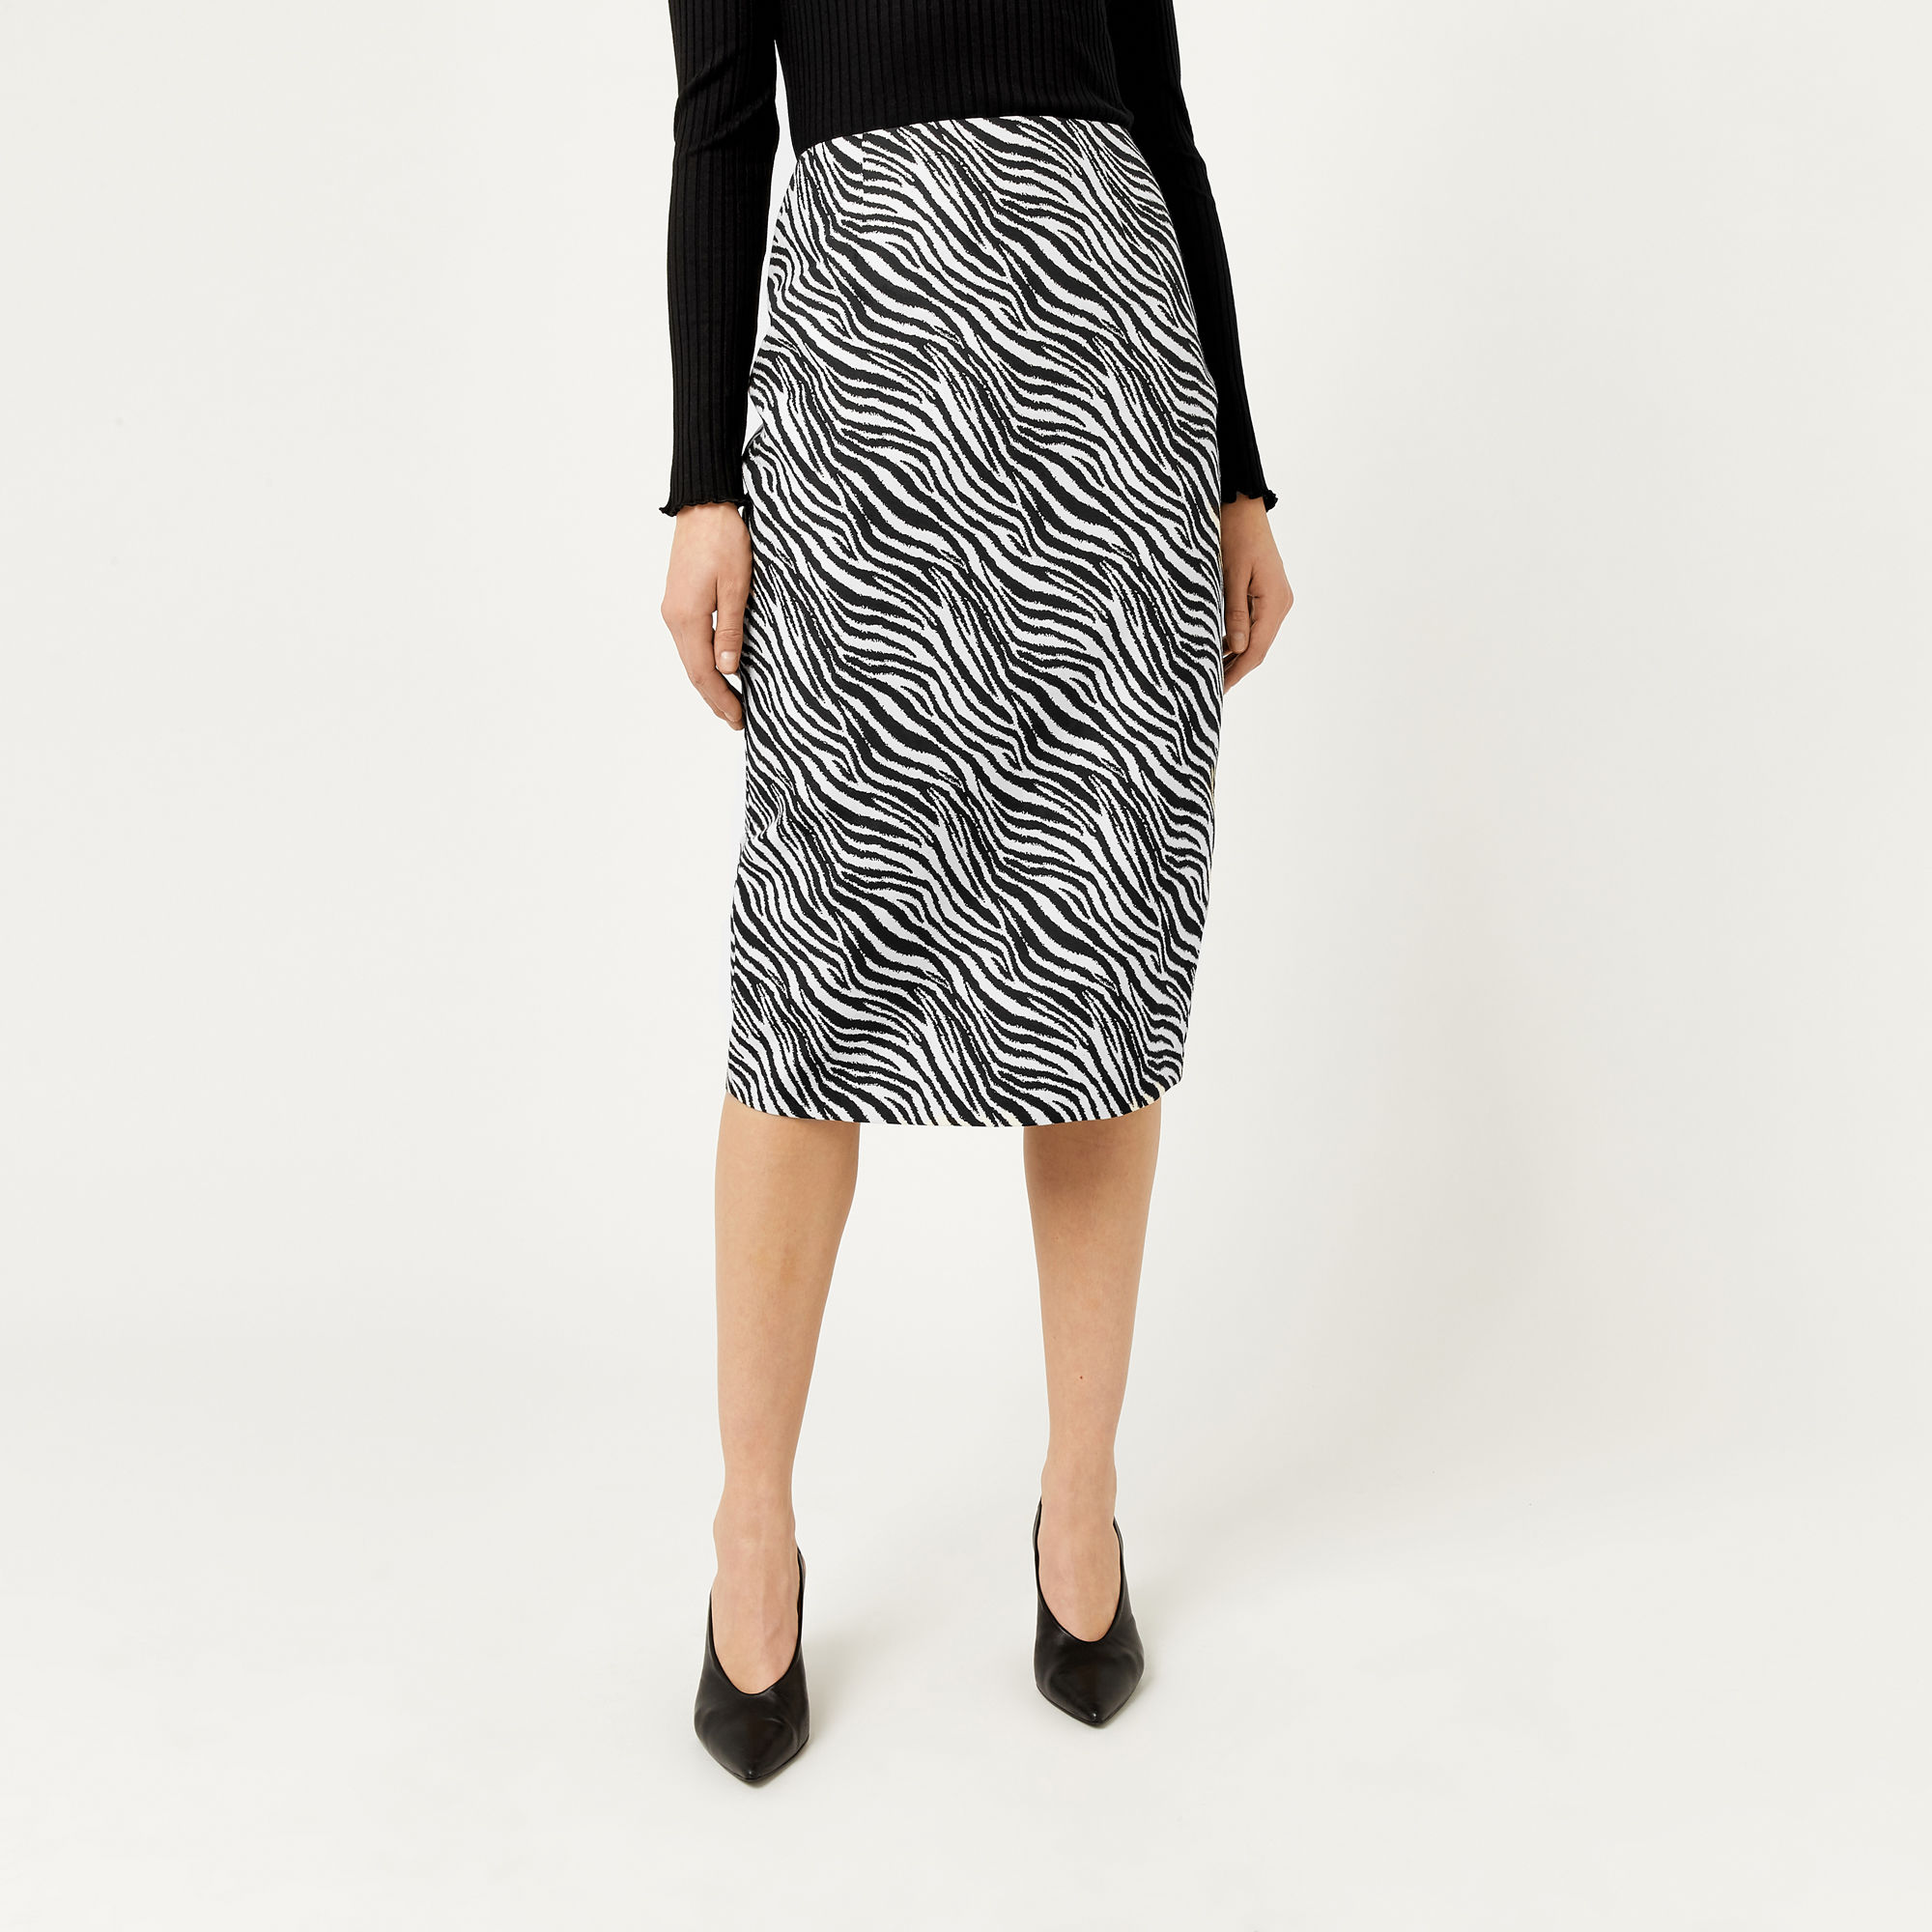 10 Non-Boring Pencil Skirts You Can Wear to the Office